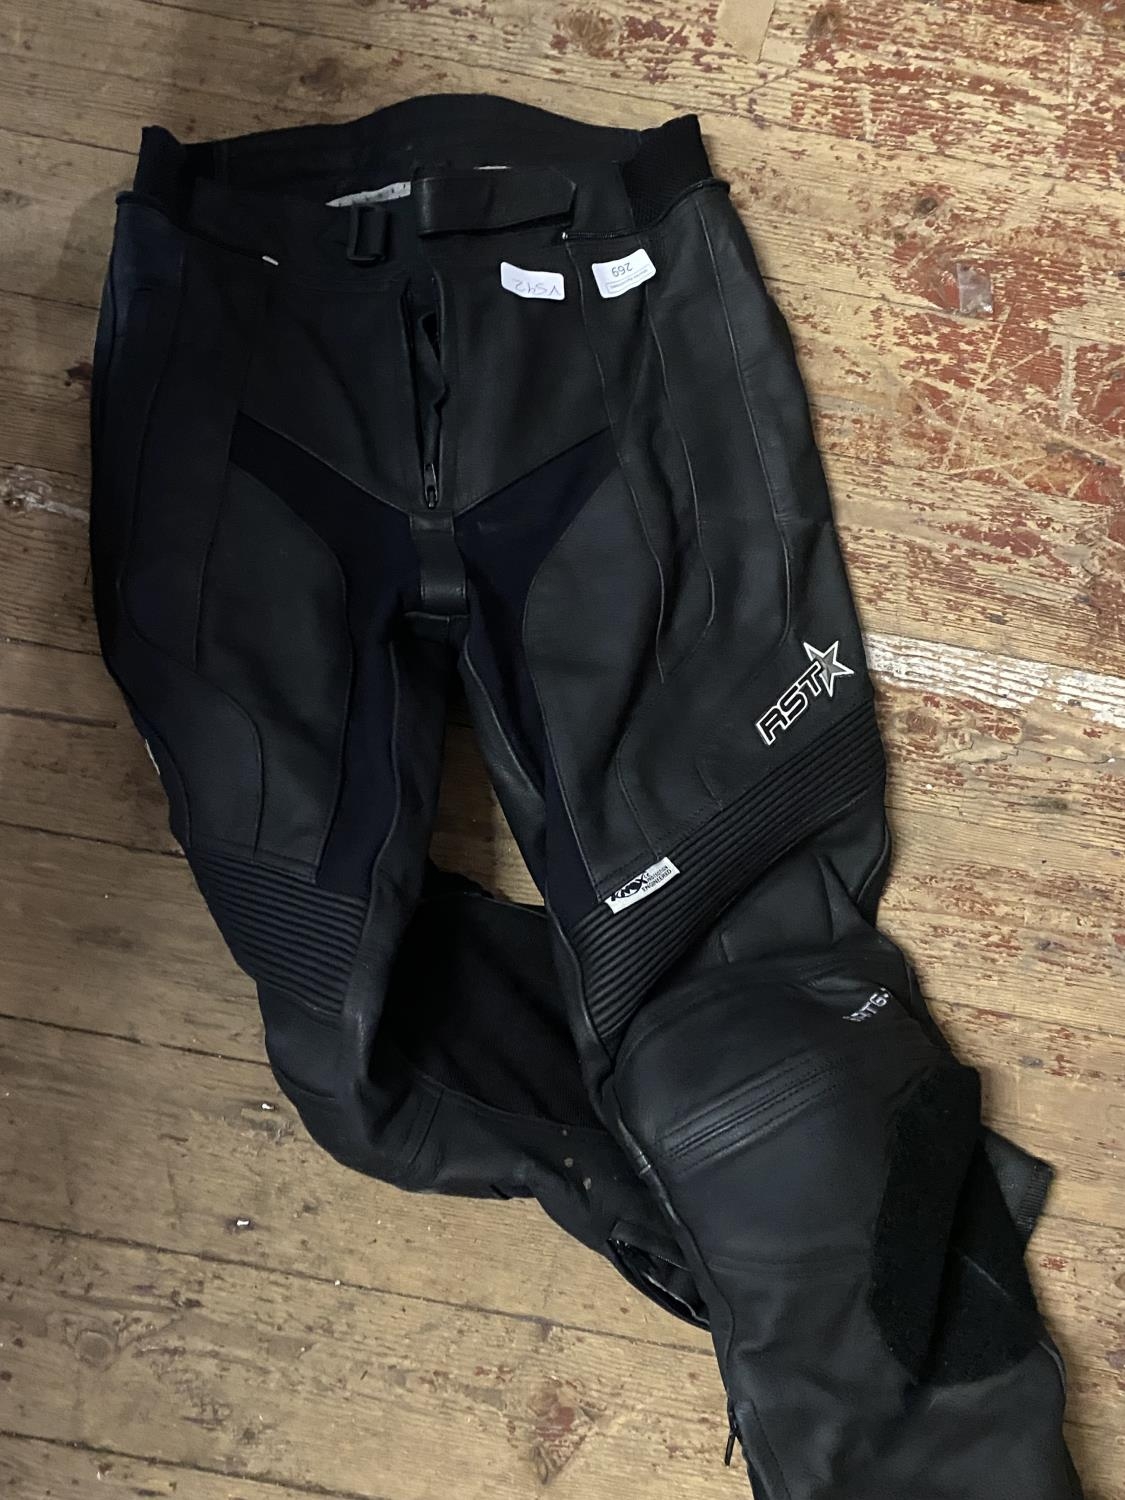 A pair of RST motorbike trousers size 14